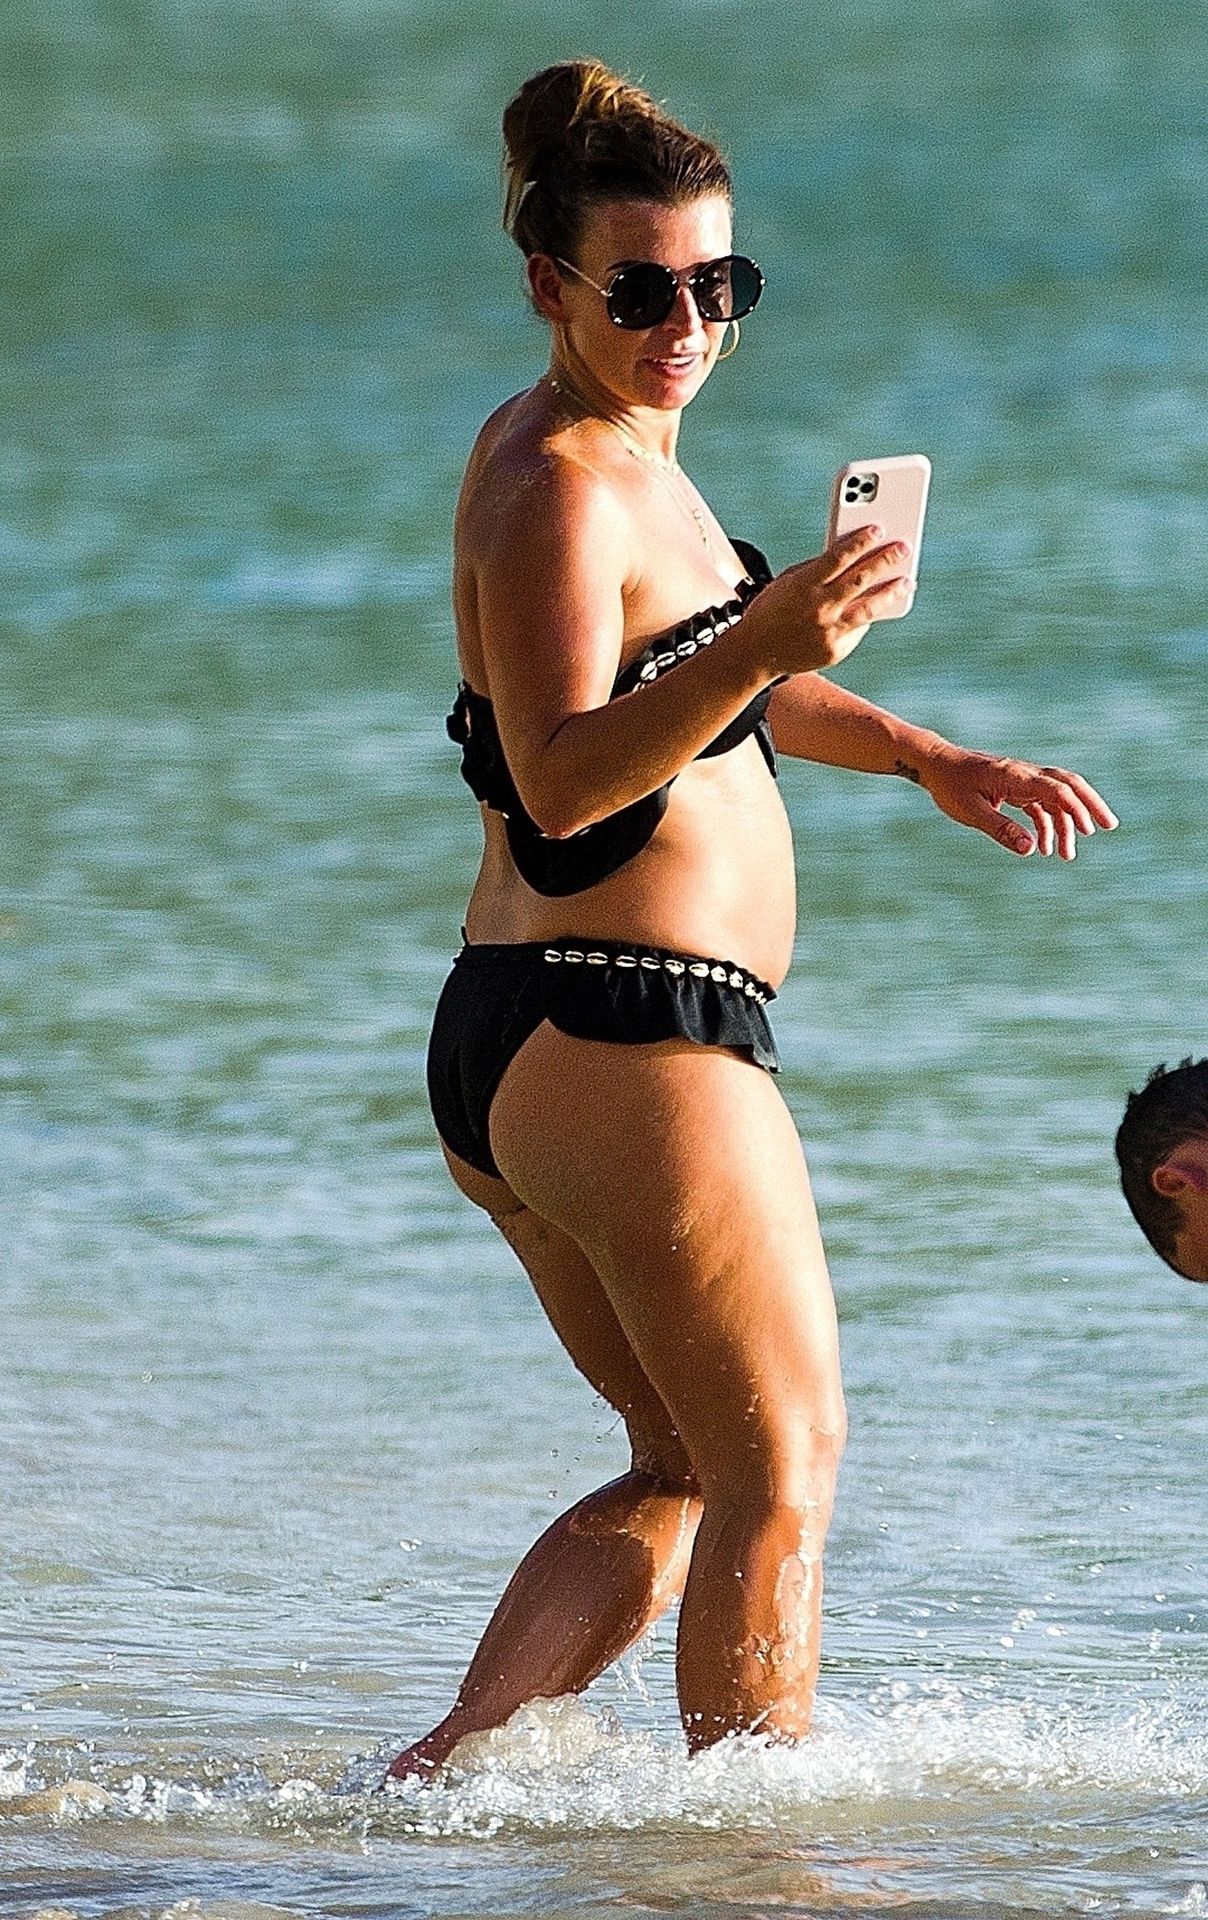 Coleen Rooney Dons Her Skimpy Black Bikini on Holiday in Barbados (166 Photos)